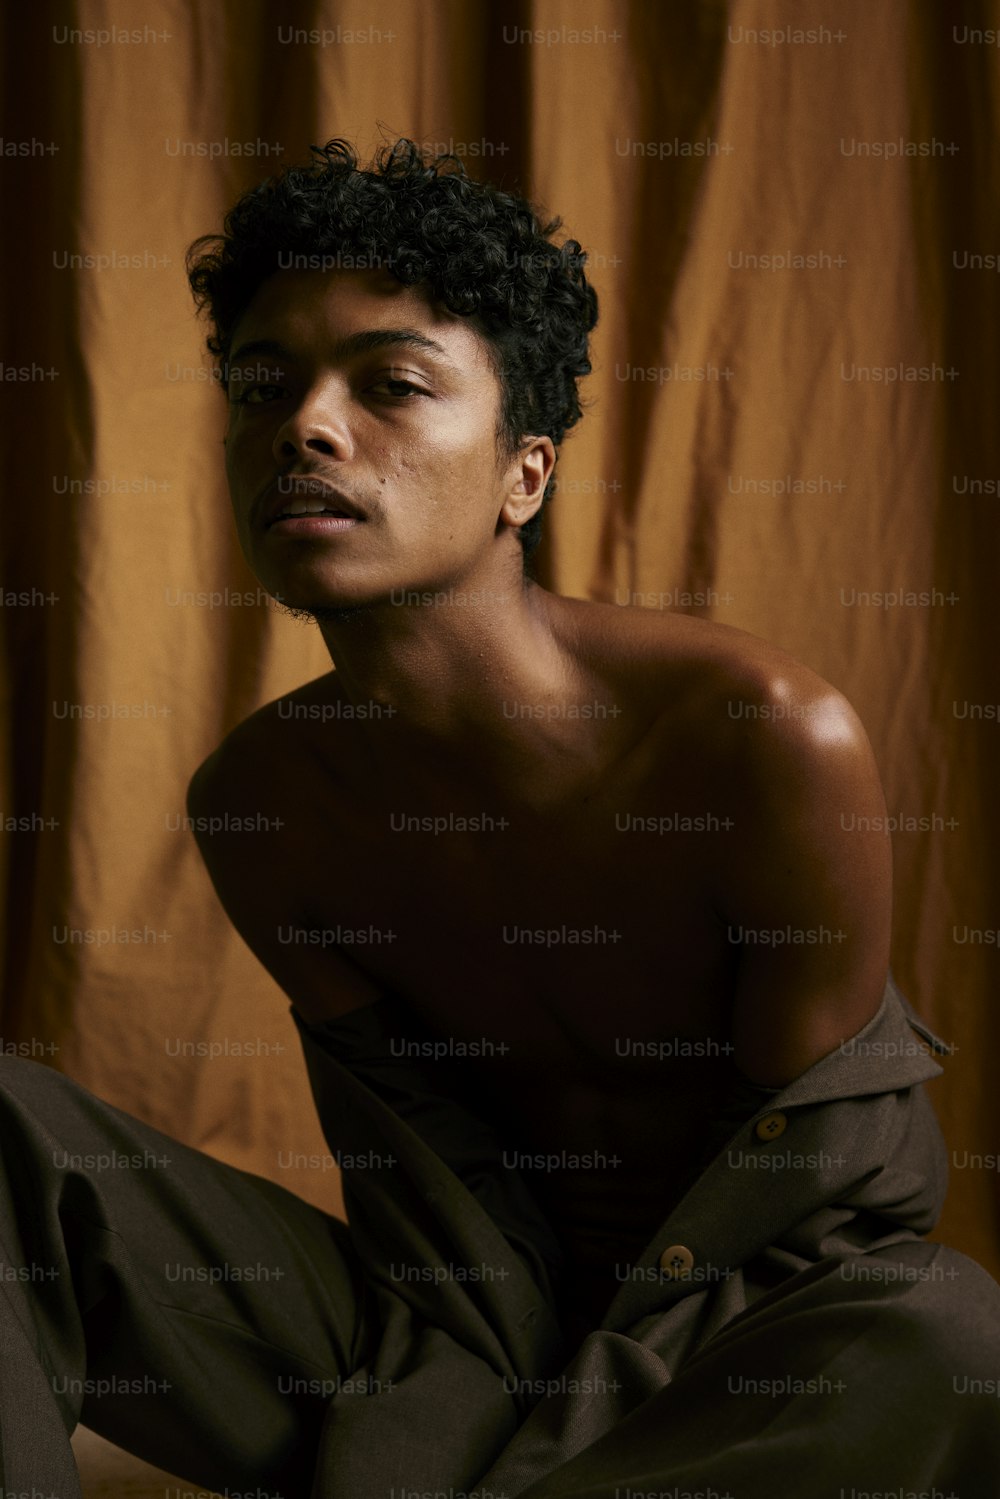 a shirtless man sitting on the floor in front of a curtain